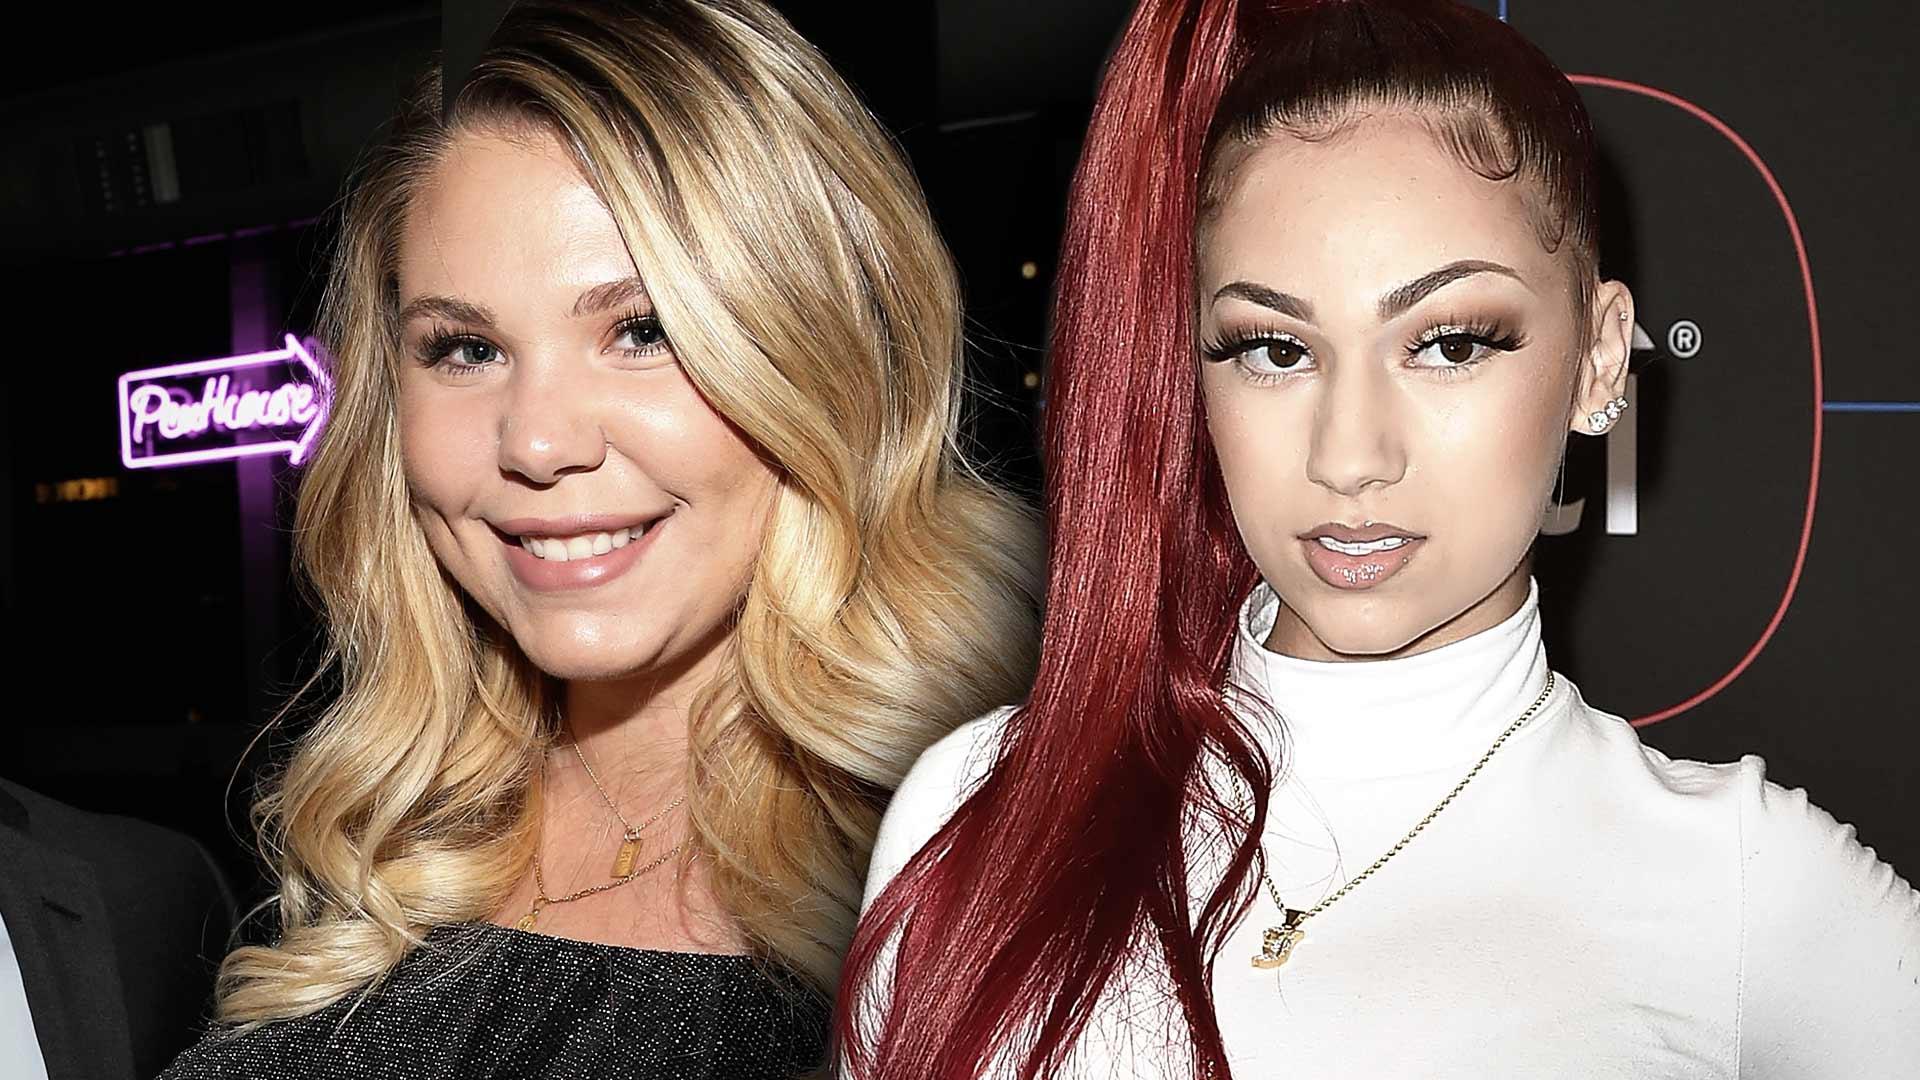 ‘Teen Mom 2’ Star Kailyn Lowry Gets Shout Out from Bhad Bhabie to Promote CBD Infused Hair Line